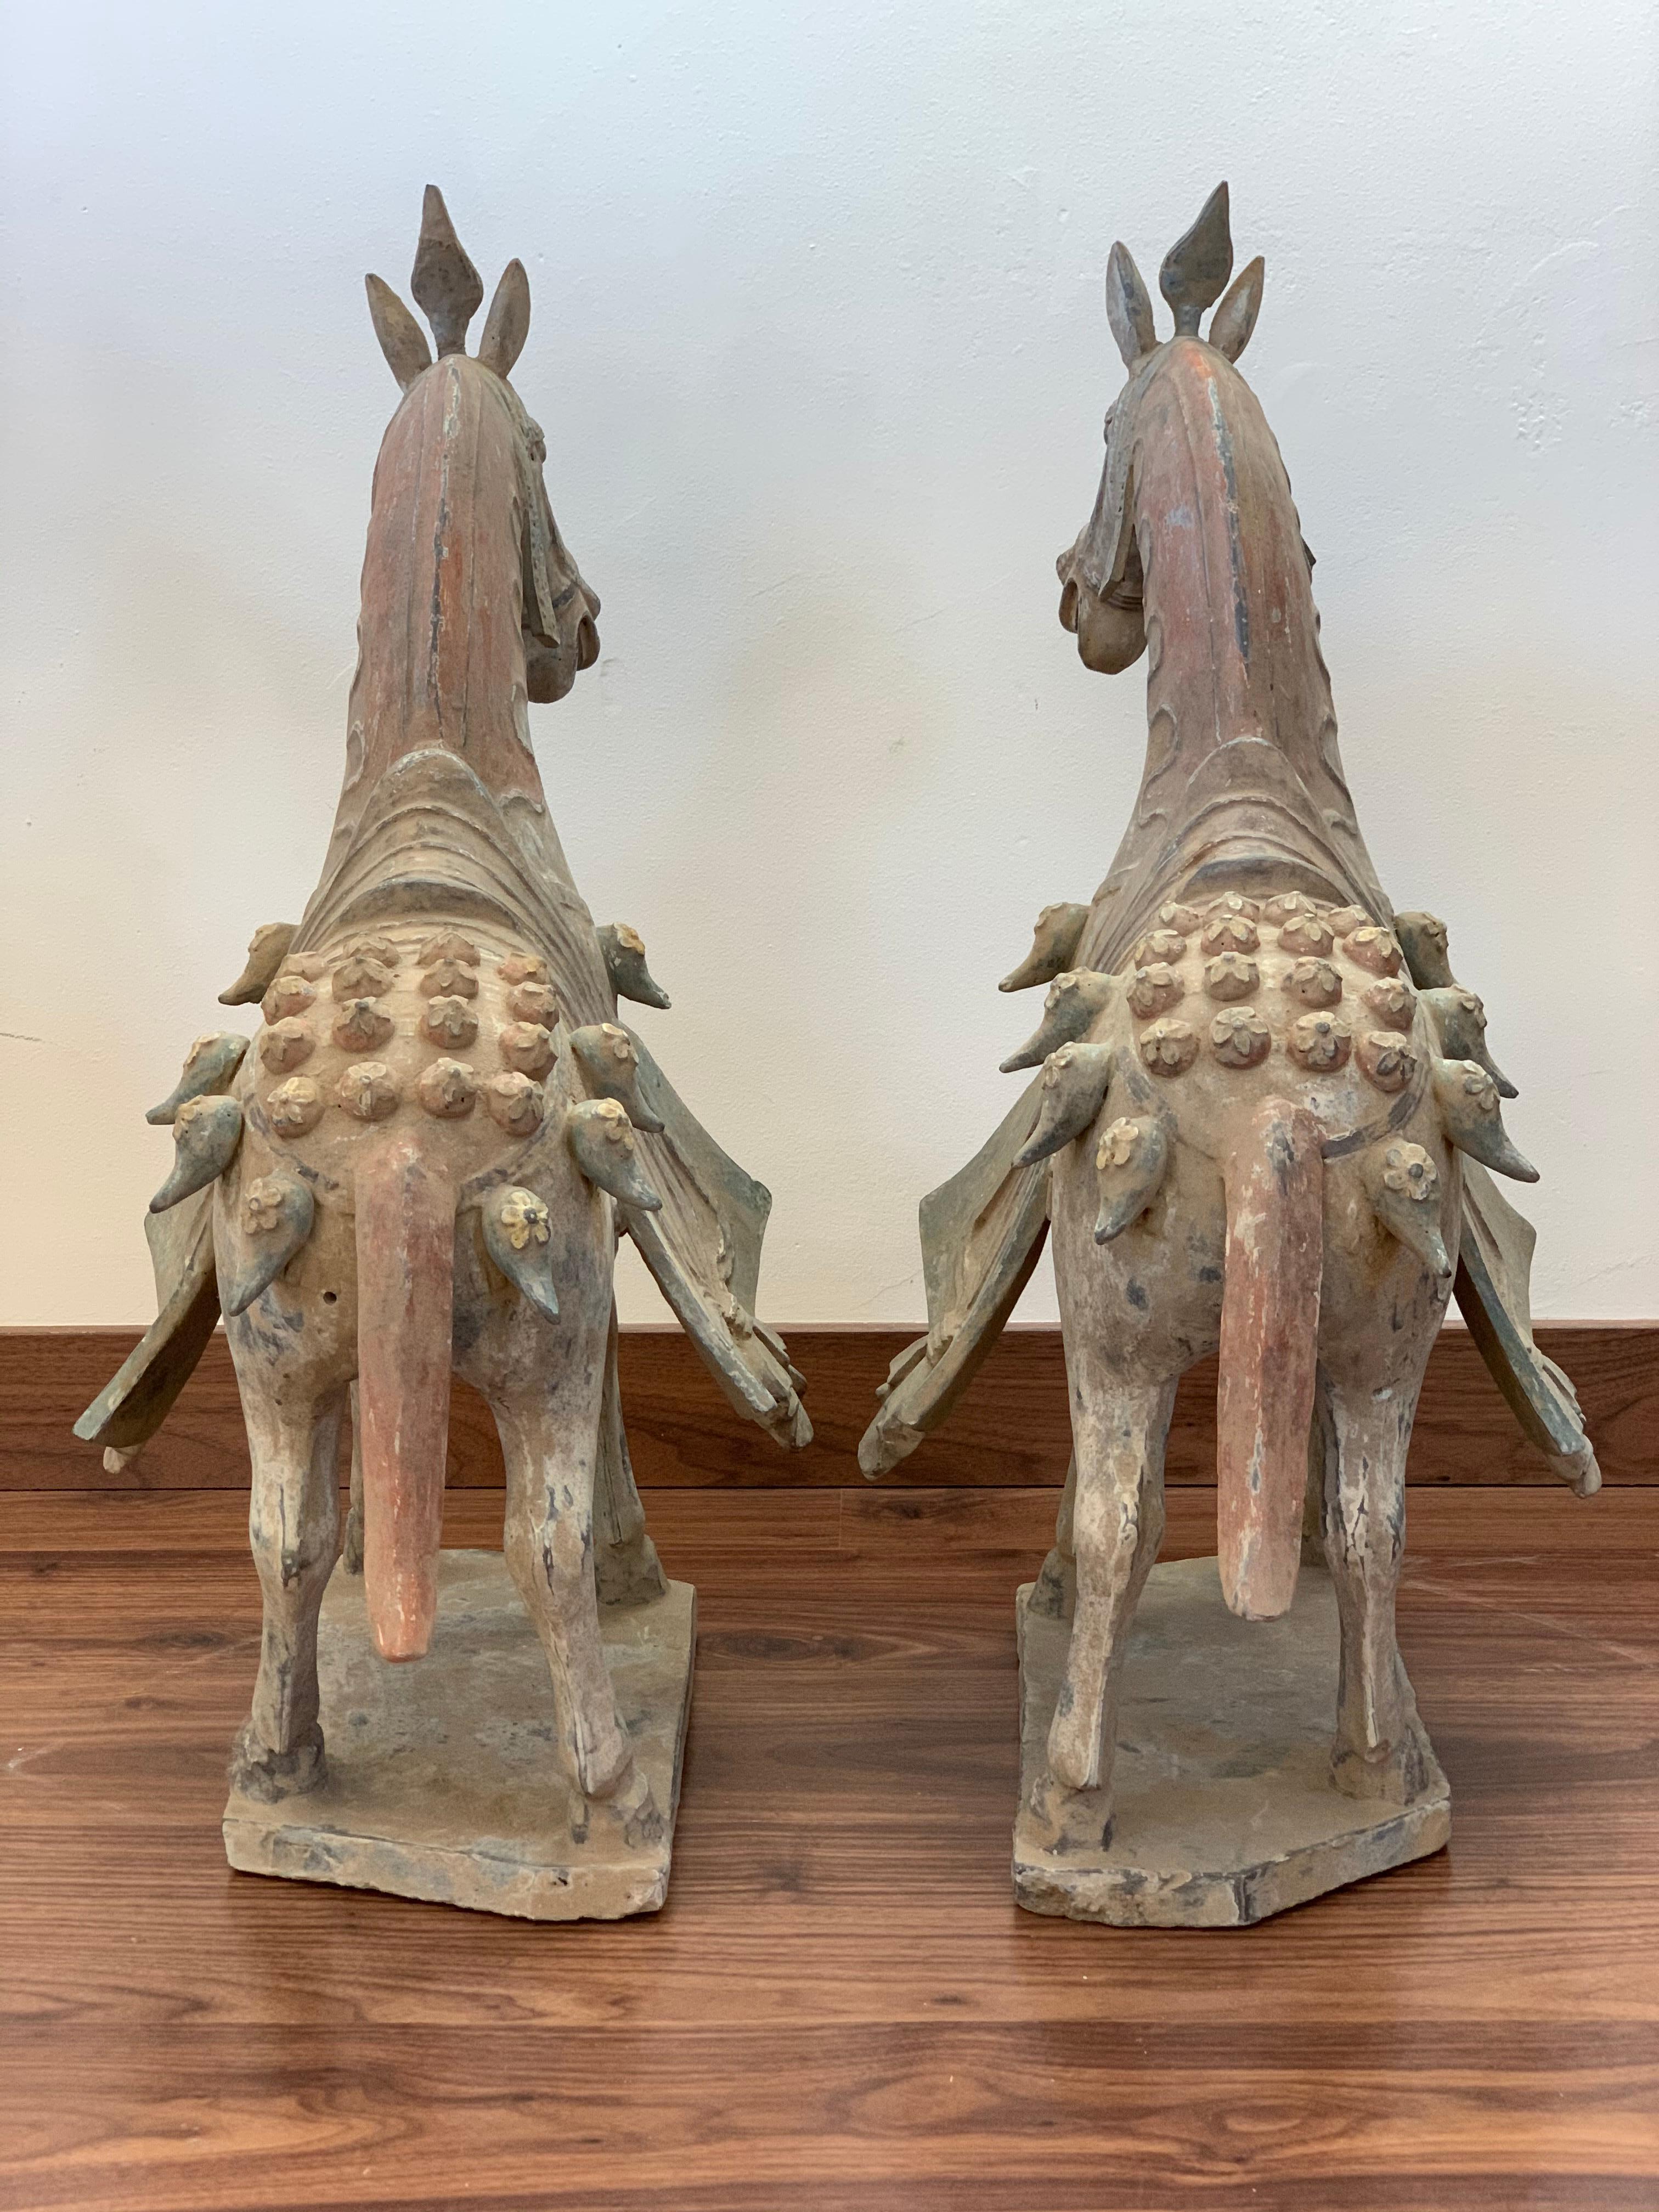 Chinese  Northern Wei Dynasty Terracotta Horses, TL Tested,  '386 AD-535 AD'